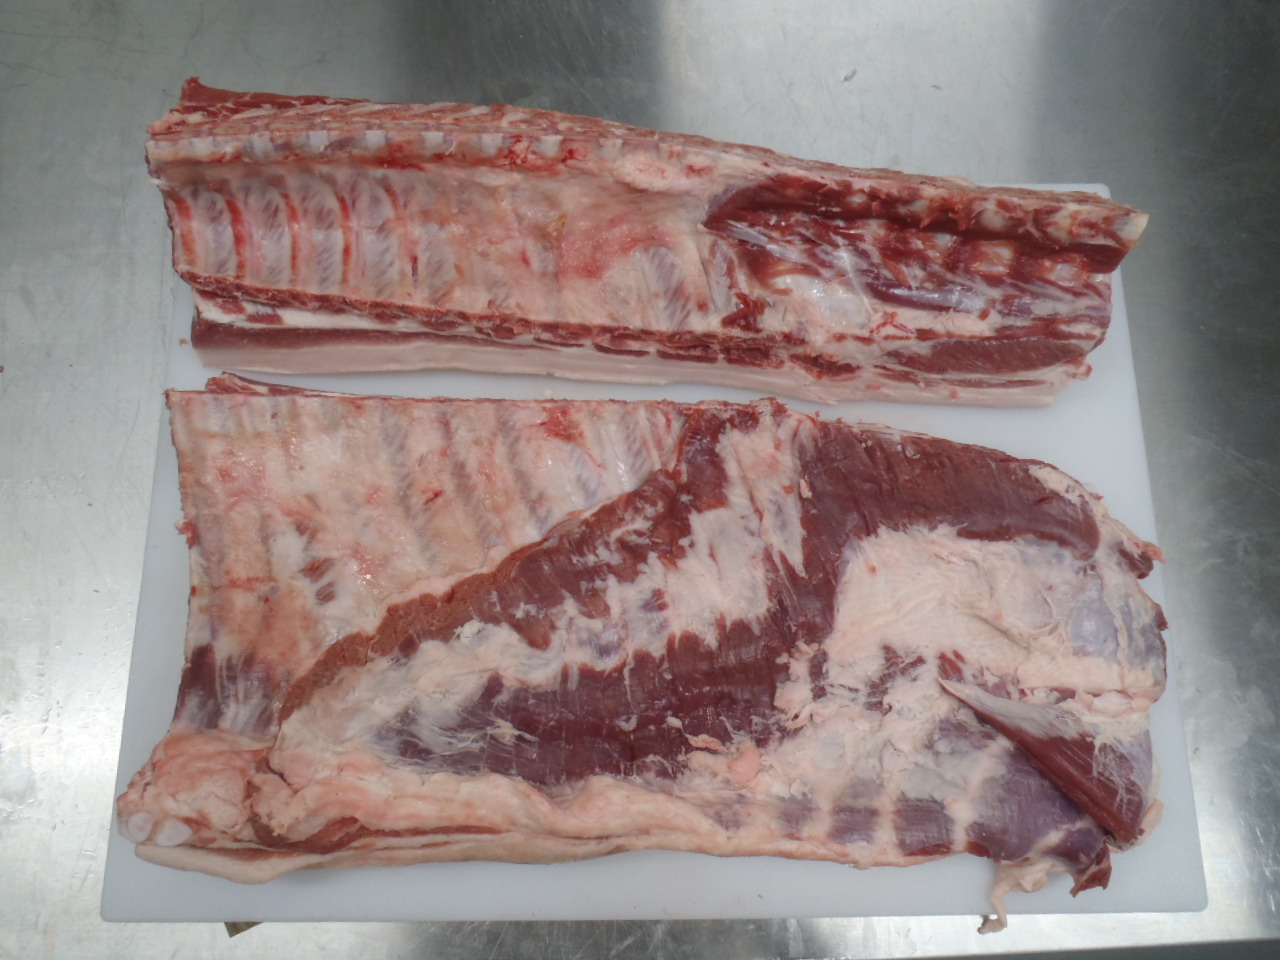 Loin and belly, separated